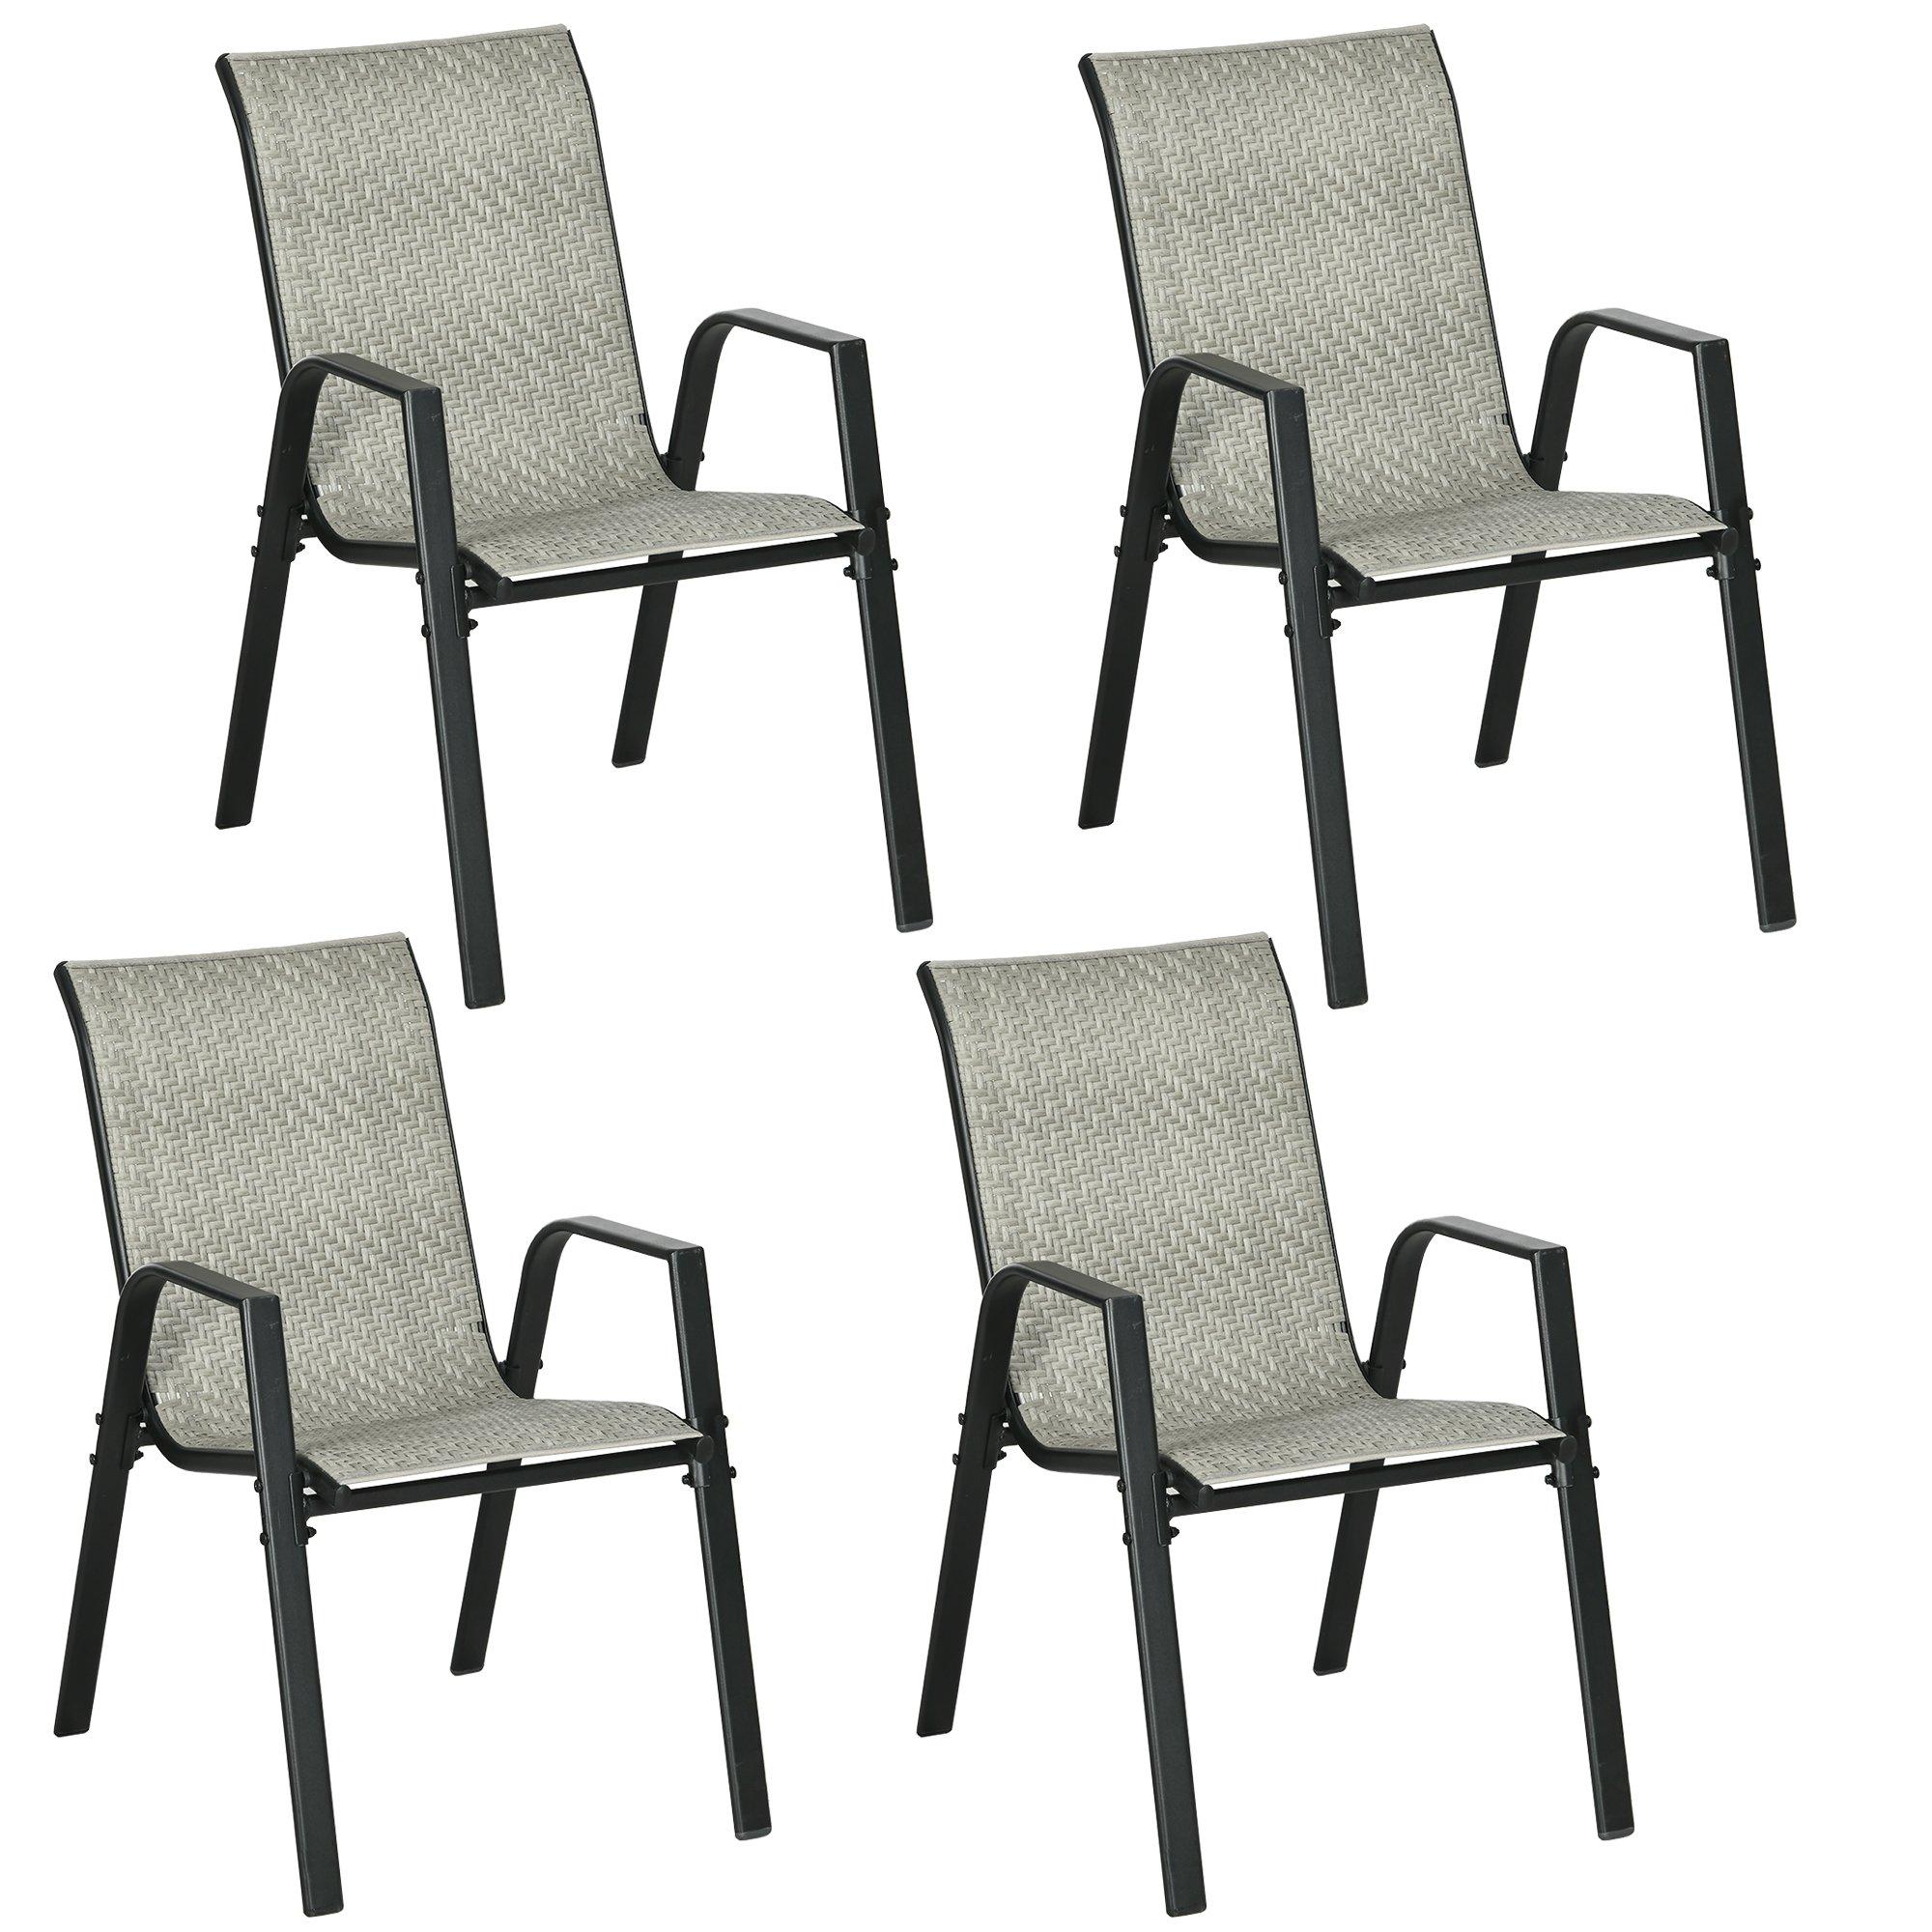 Wicker Dining Chairs Set of 4, Stackable Outdoor Chairs